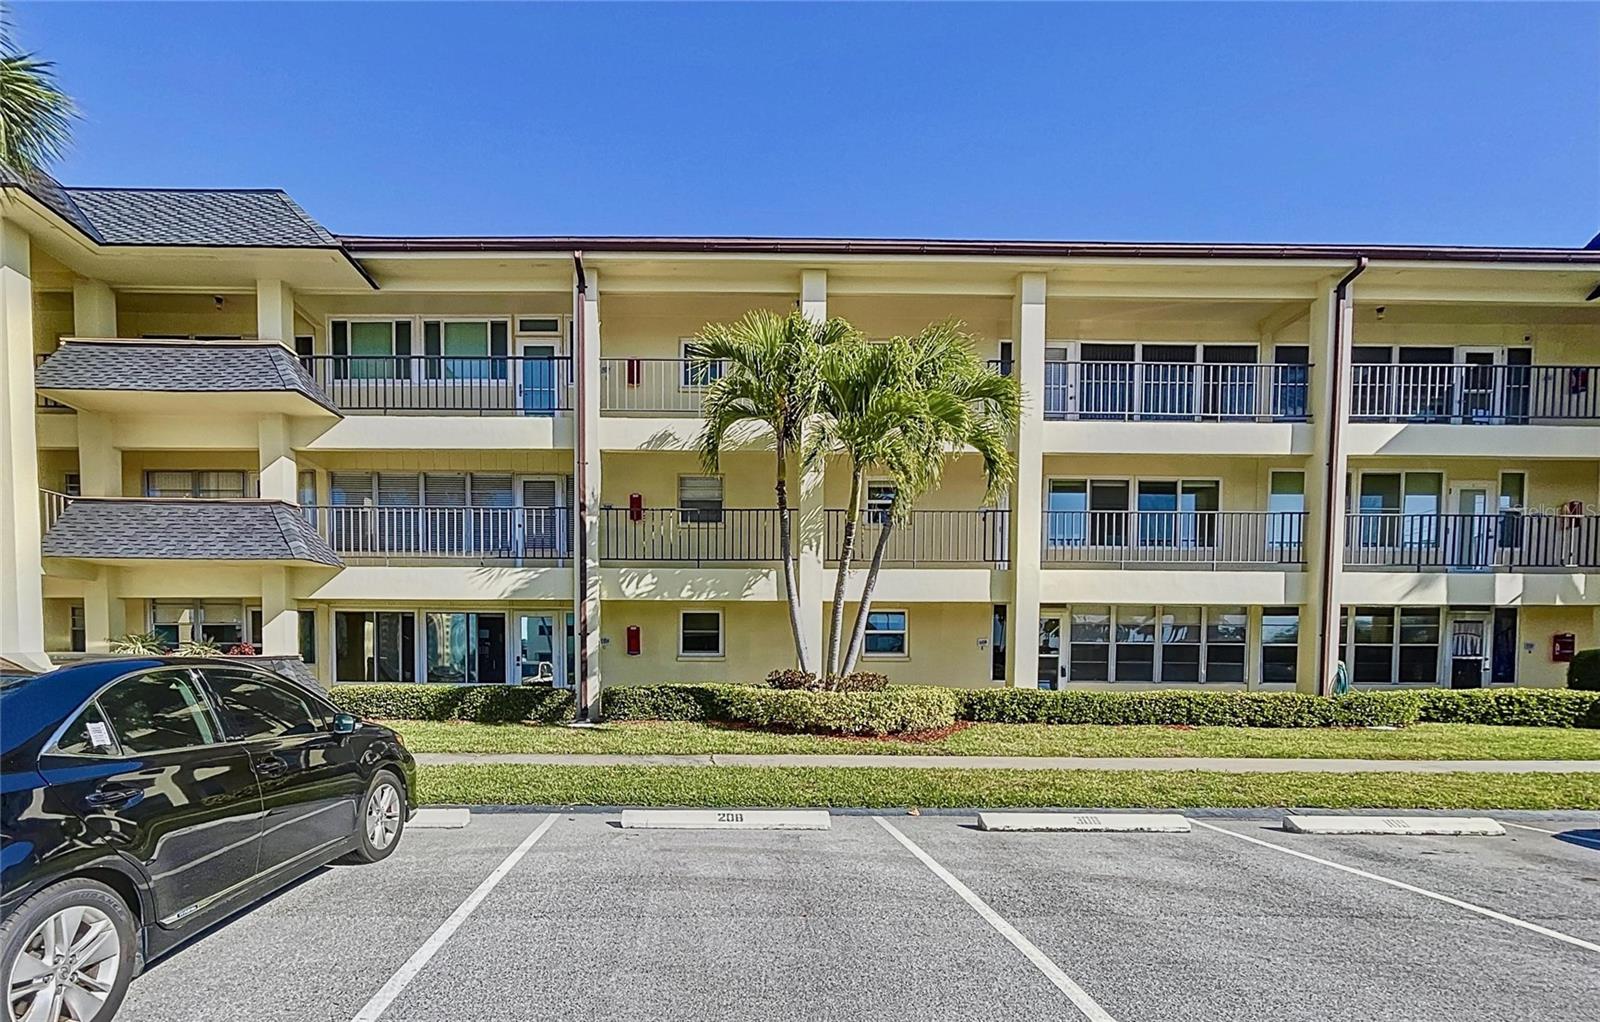 Well maintained condo community.